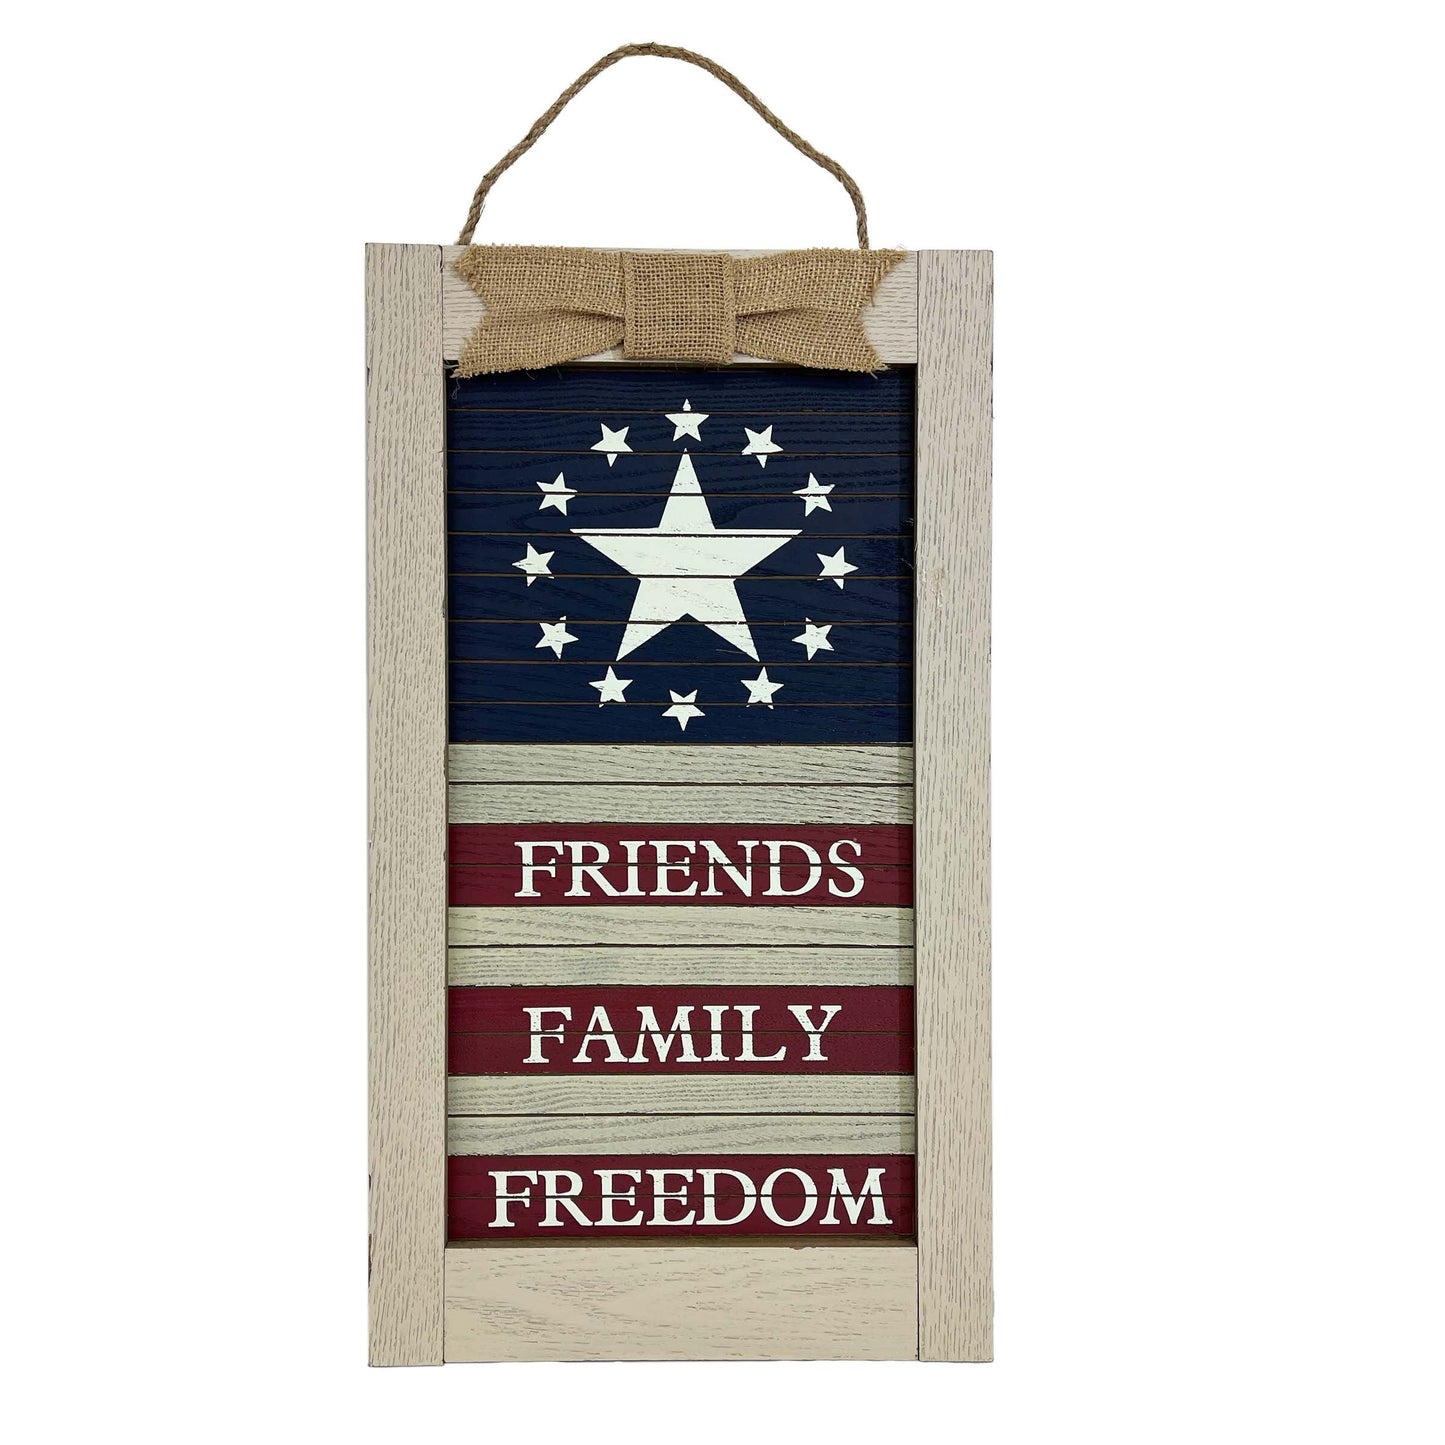 Friends Family Freedom Hanging Sign, Patriotic Party Decoration, Independence Day Wooden Plaque, 4th of July Decorations for Home